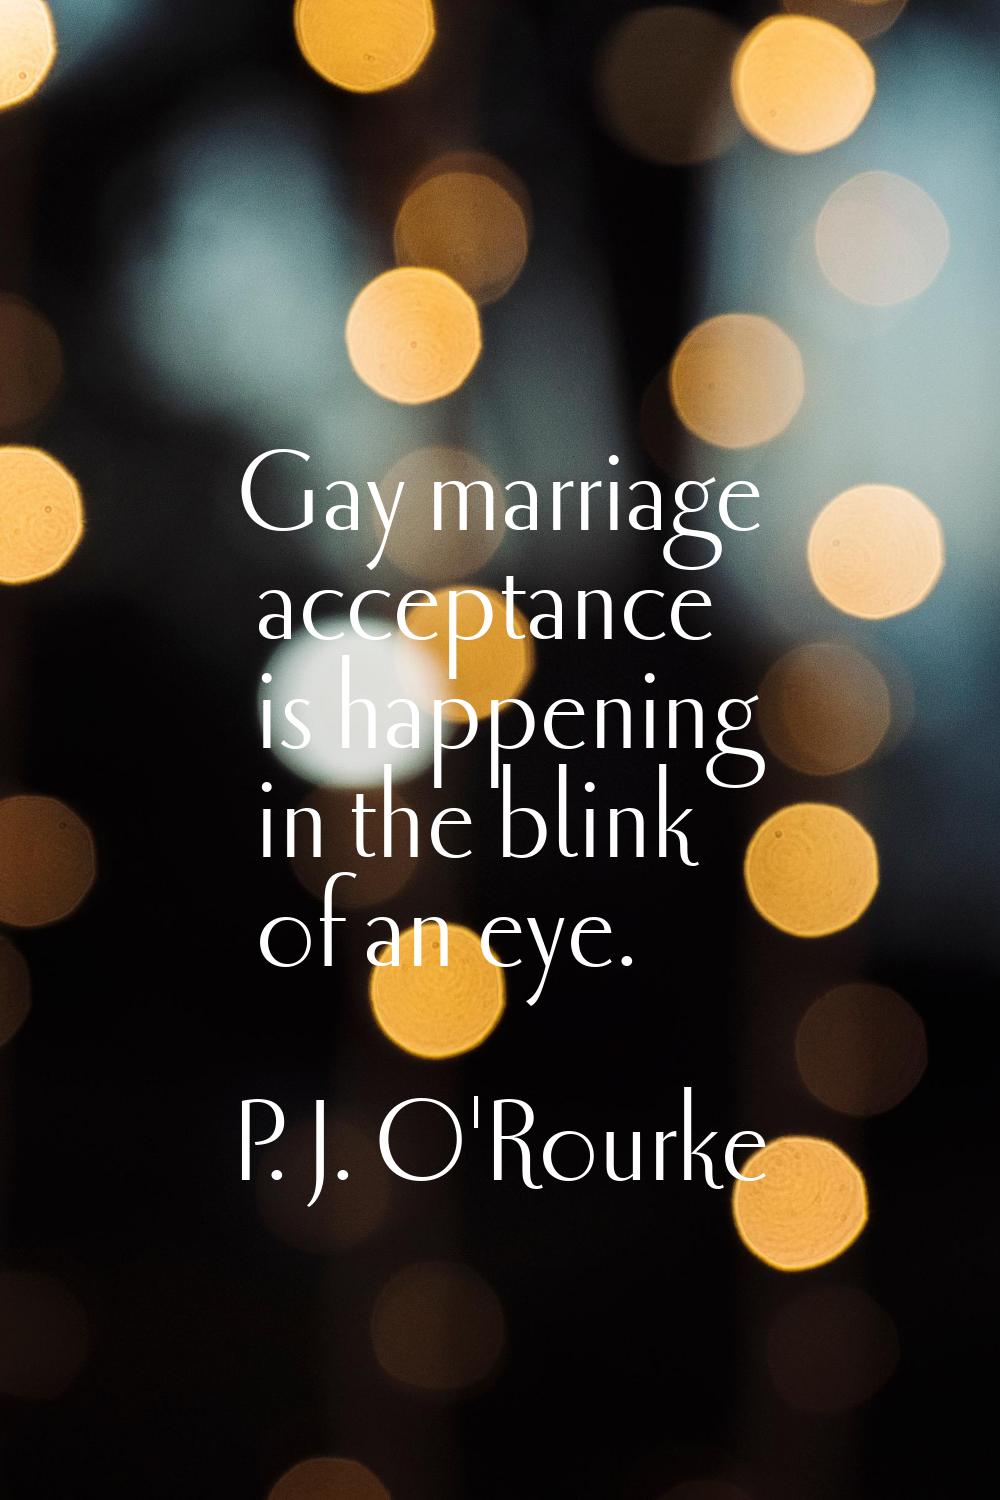 Gay marriage acceptance is happening in the blink of an eye.